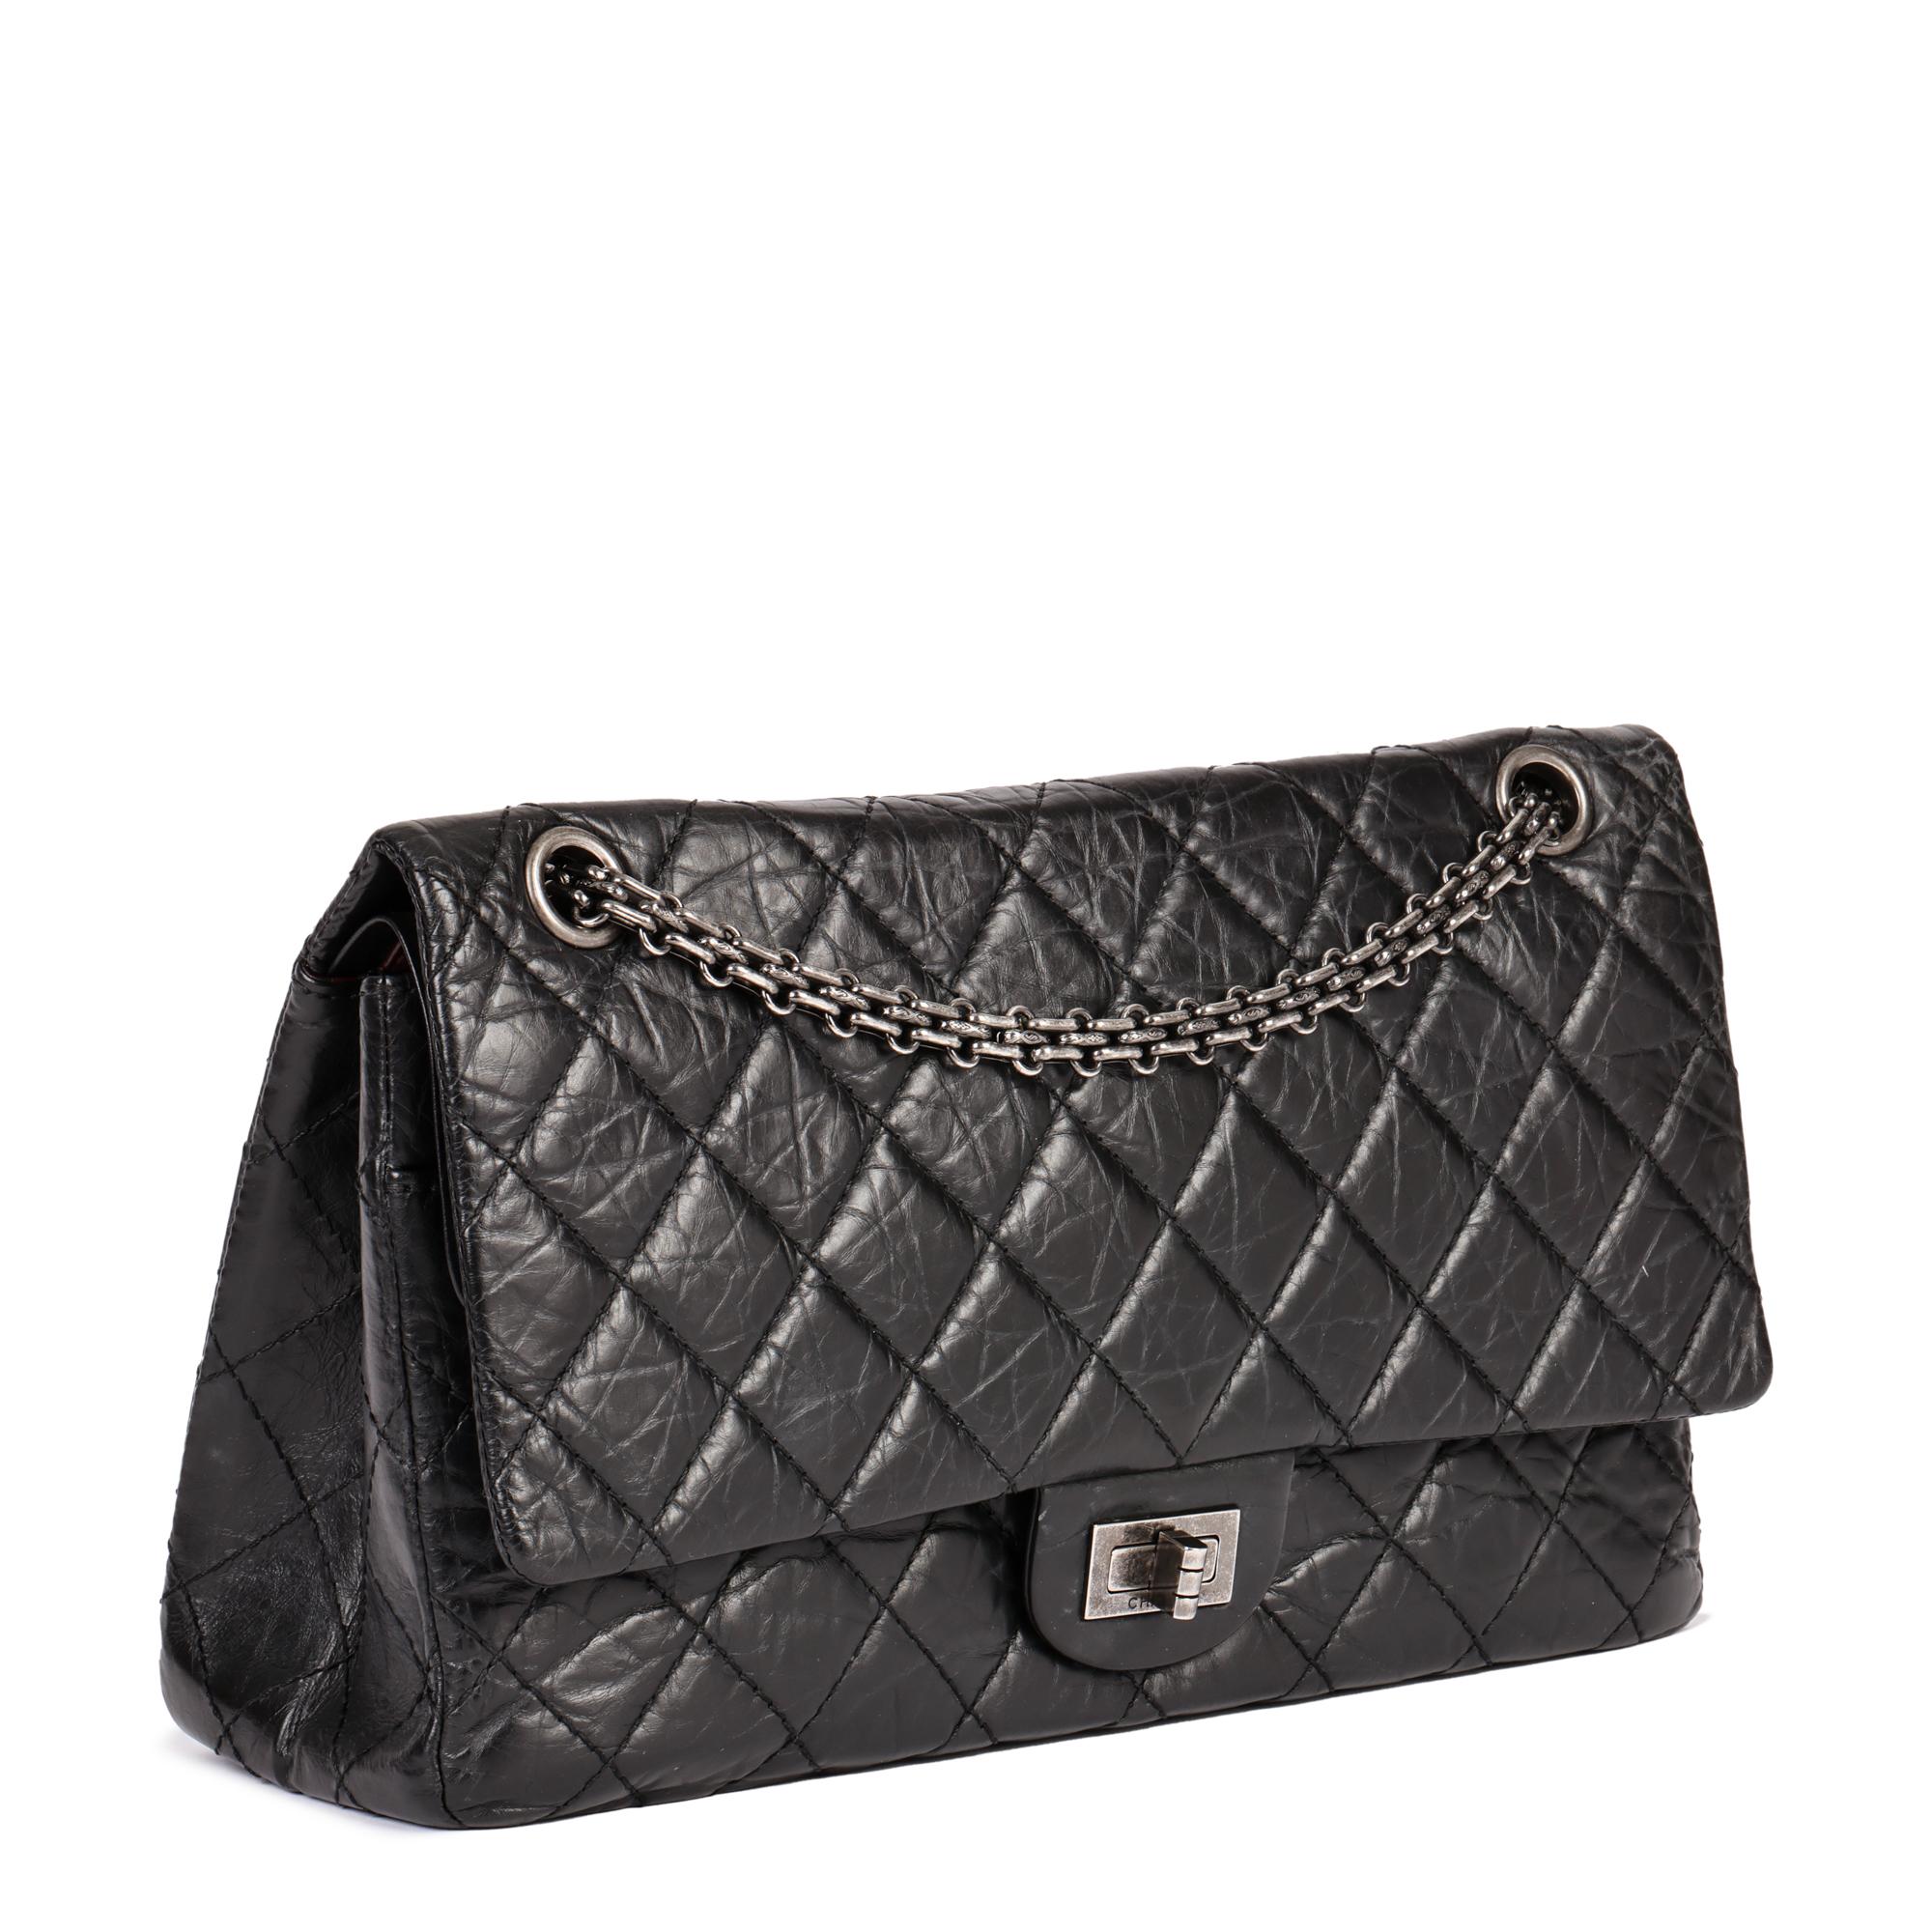 CHANEL
Black Aged Calfskin Leather 226 2.55 Reissue Double Flap Bag

Xupes Reference: HB4851
Serial Number: 12458801
Age (Circa): 2008
Accompanied By: Authenticity Card
Authenticity Details: Authenticity Card, Serial Sticker (Made in France)
Gender: